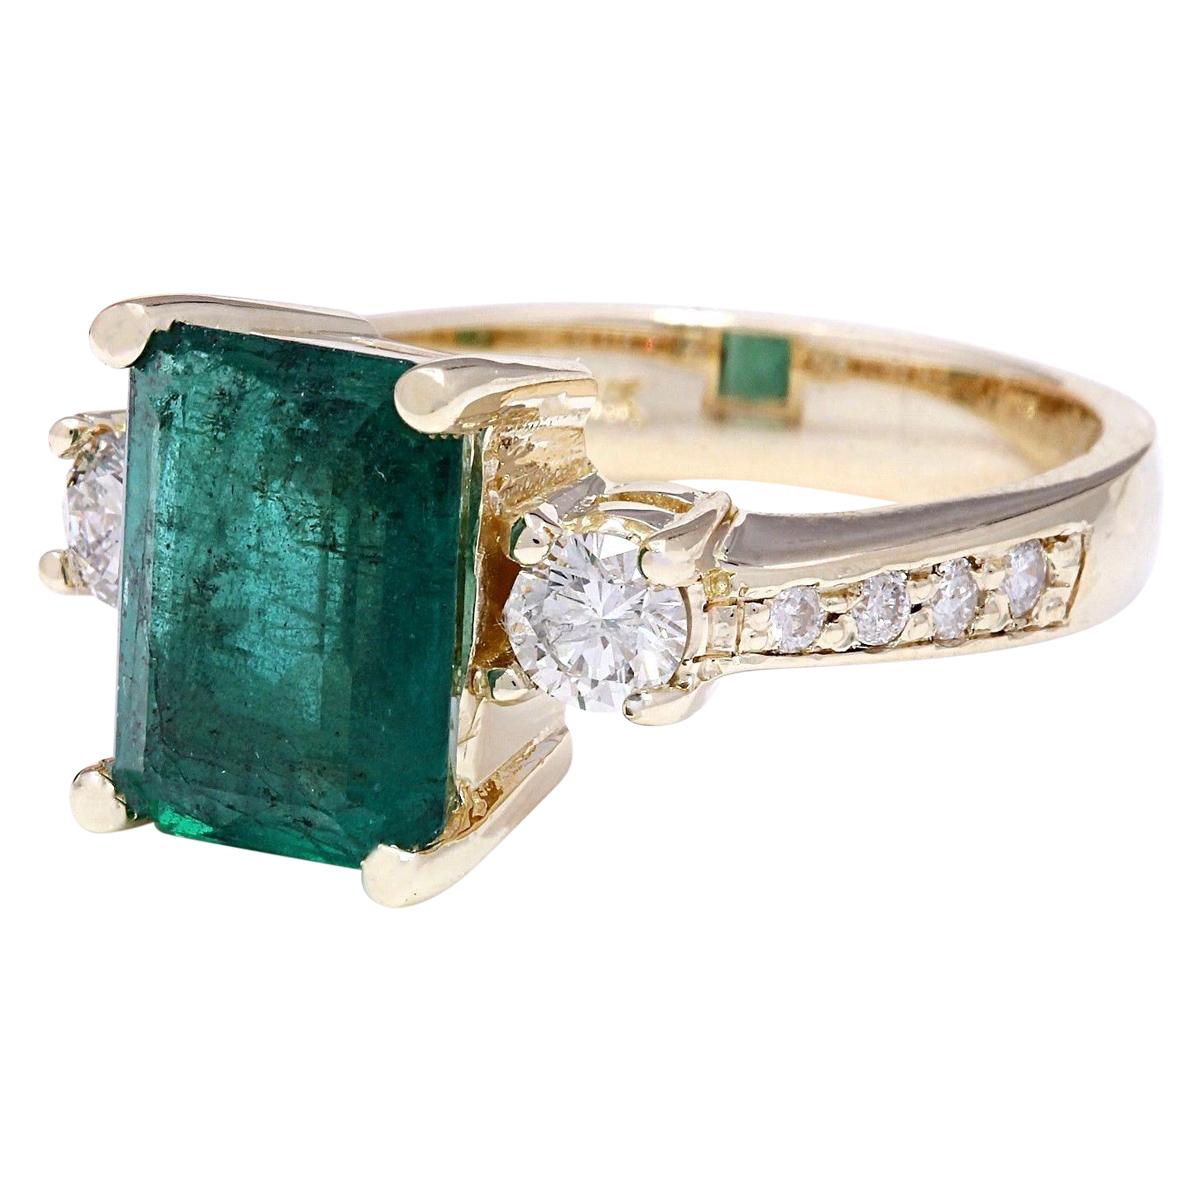 4.20 Carat Natural Emerald 14K Solid Yellow Gold Diamond Ring
 Item Type: Ring
 Item Style: Engagement
 Material: 14K Yellow Gold
 Mainstone: Emerald
 Stone Color: Green
 Stone Weight: 3.20 Carat
 Stone Shape: Emerald
 Stone Quantity: 1
 Stone